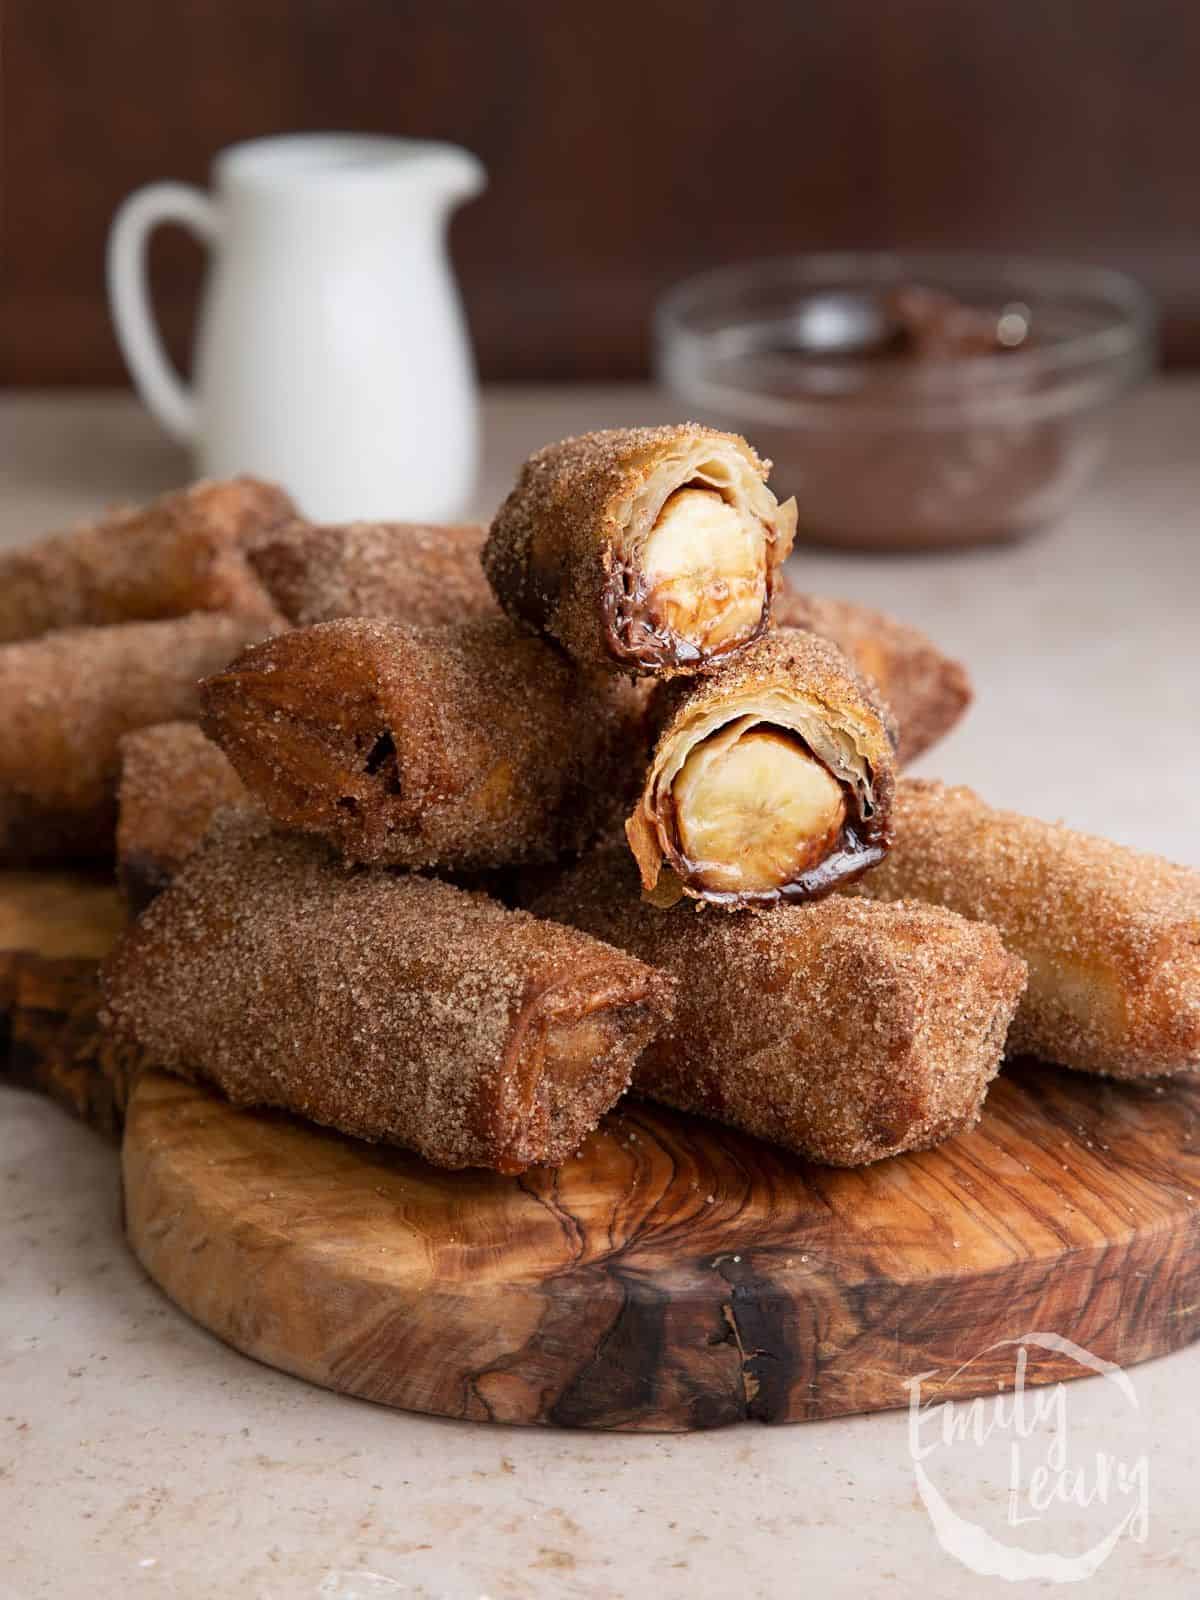 banana chocolate spring rolls made with sweet banana in a syrupy pool of warm Nutella, encased in crisp pastry, and dusted with cinnamon sugar.